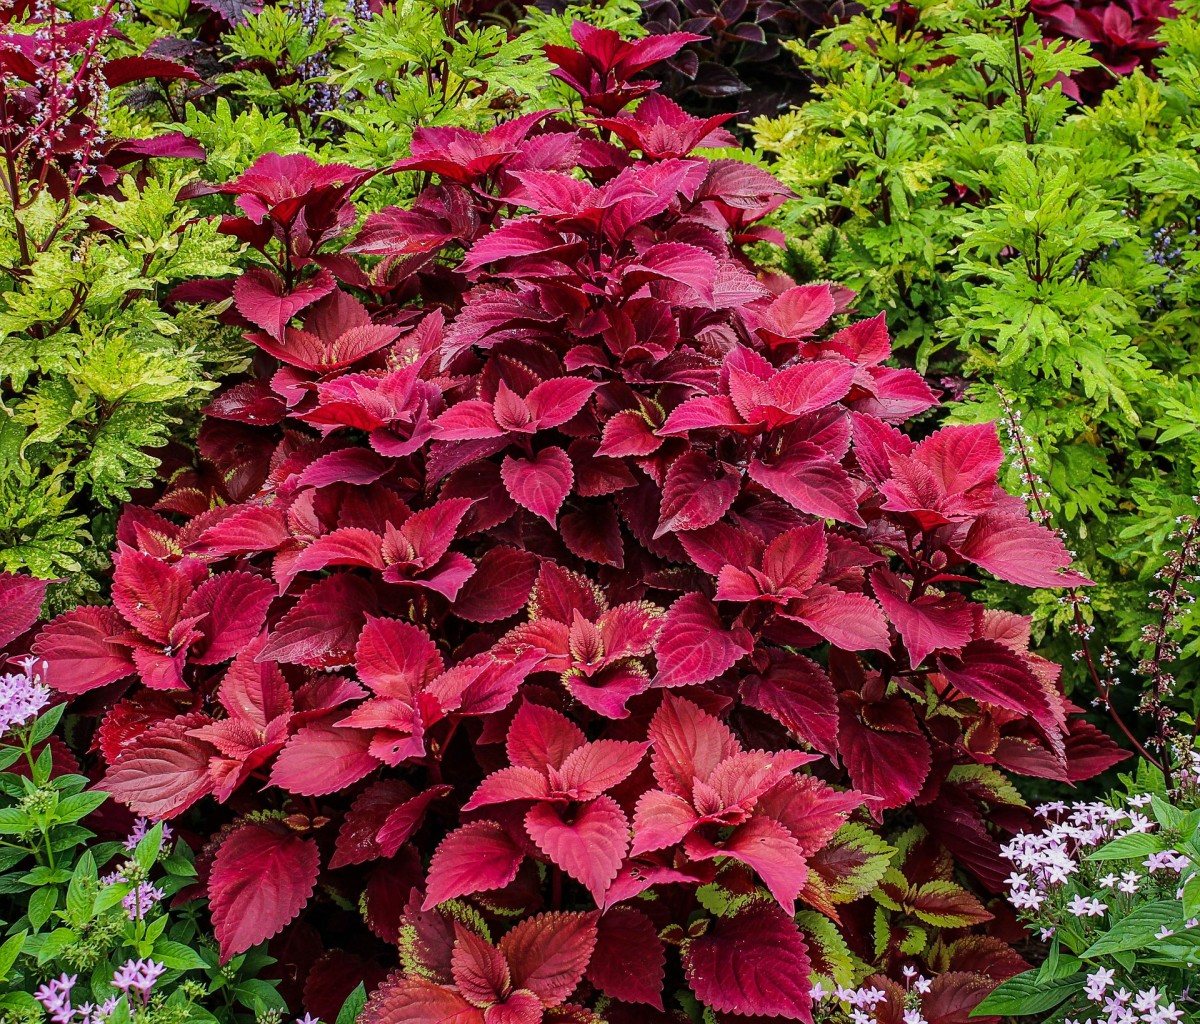 Coleus can grow up to 2 to 3 feet tall if not pinched or pruned back!